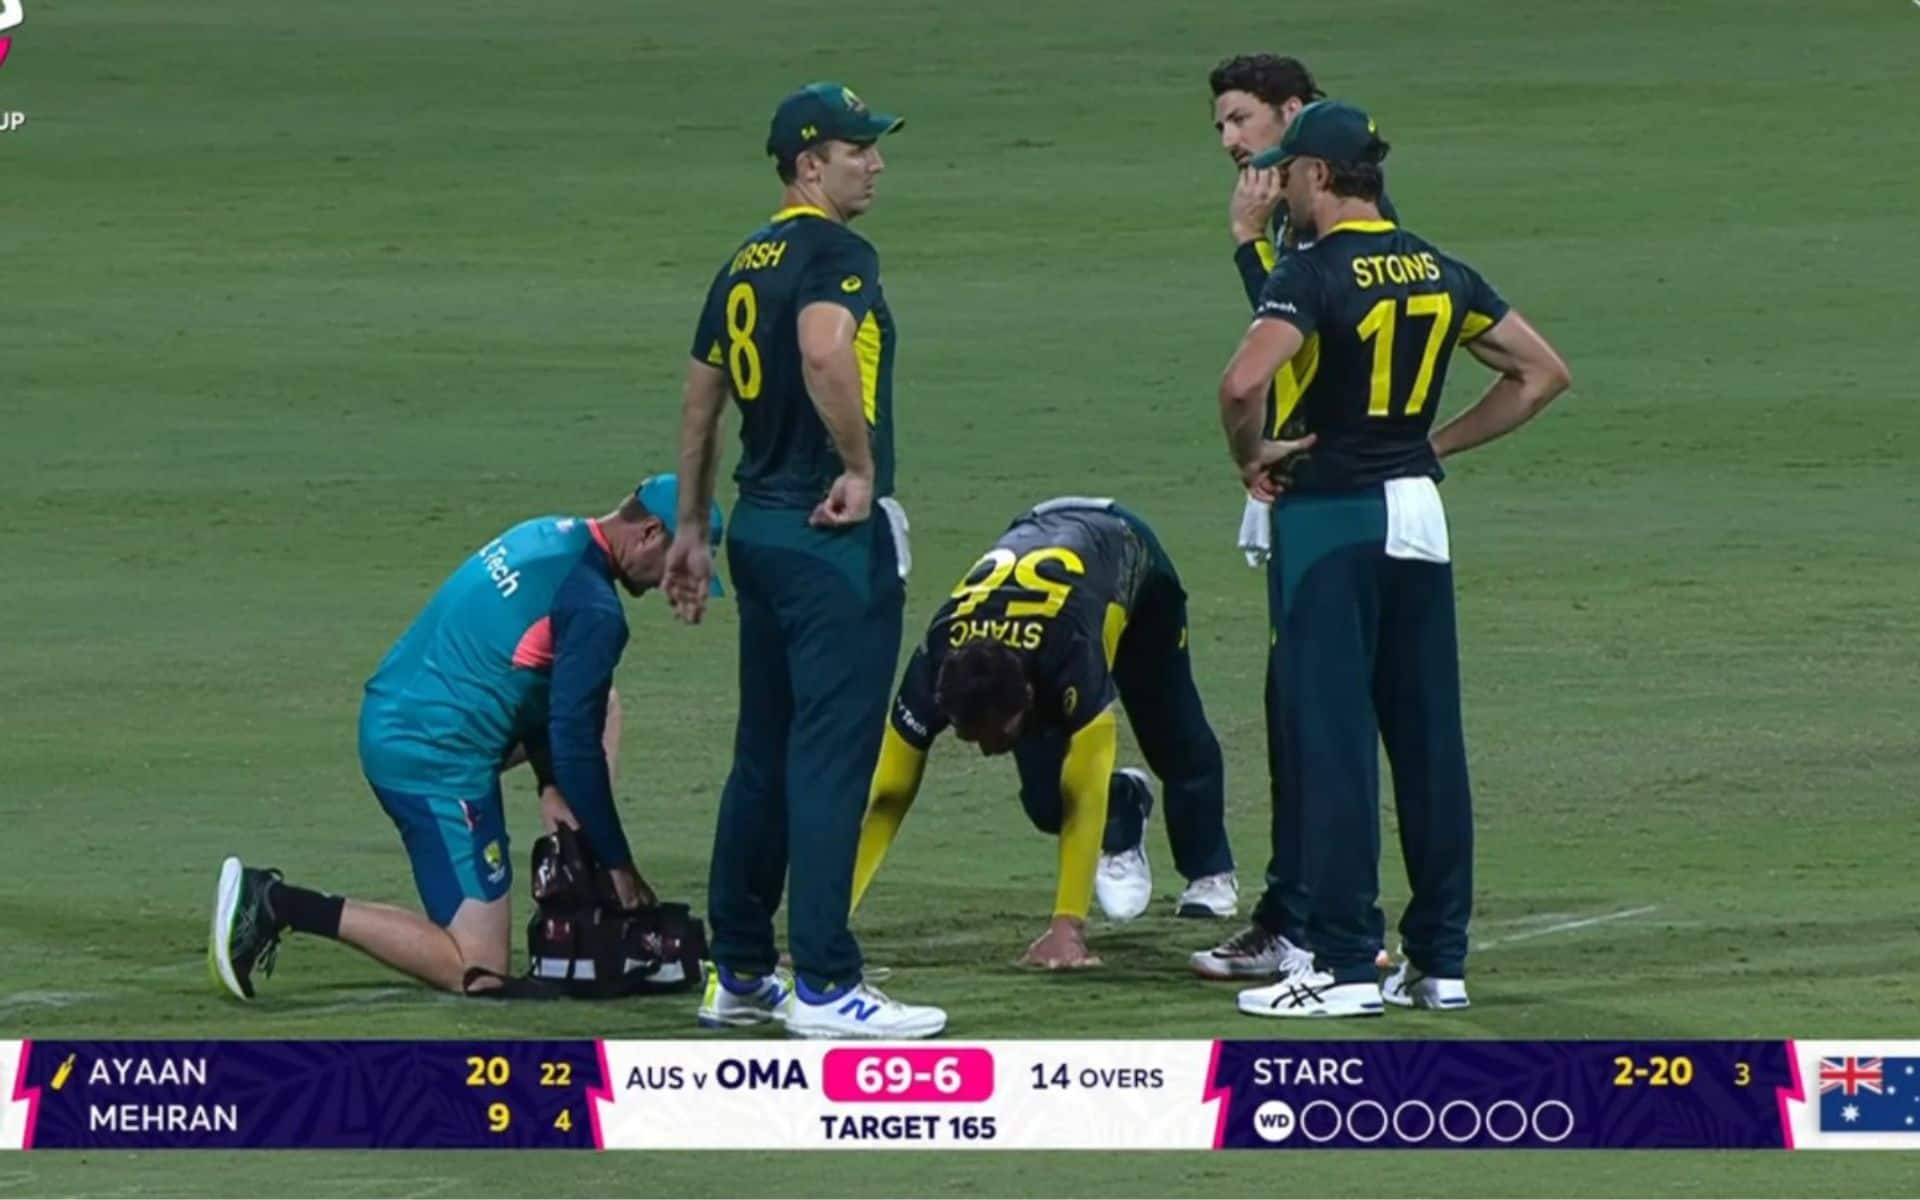 Mitchell Starc looked uncomfortable while bowling the 15th over [X]